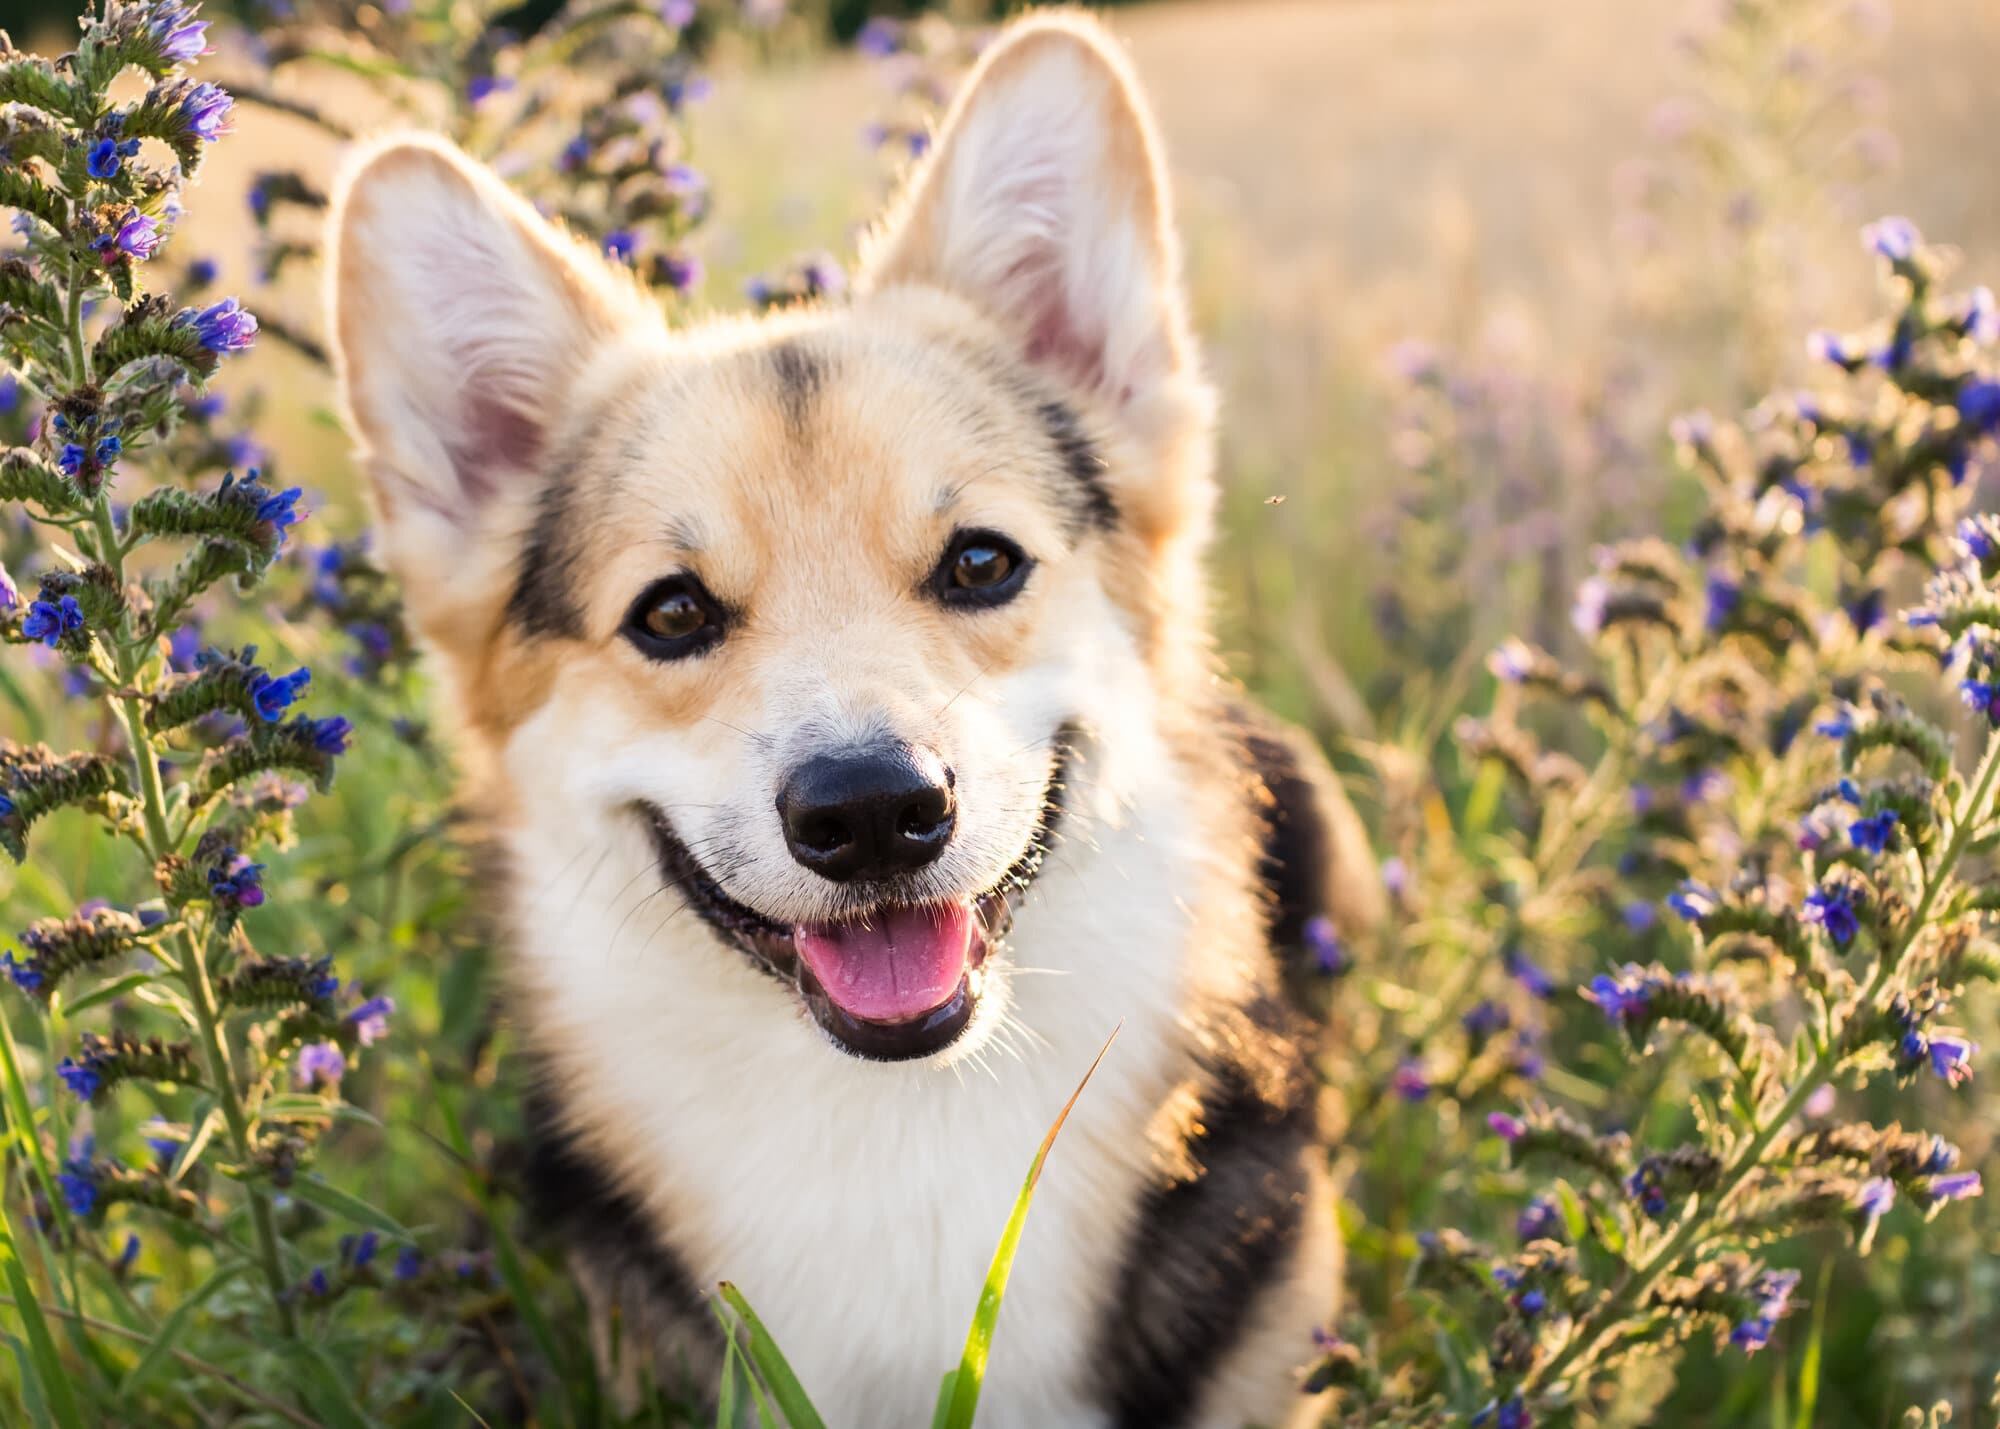 A corgi looking and smiling at the camera sitting in a field with purple flowers and green grass